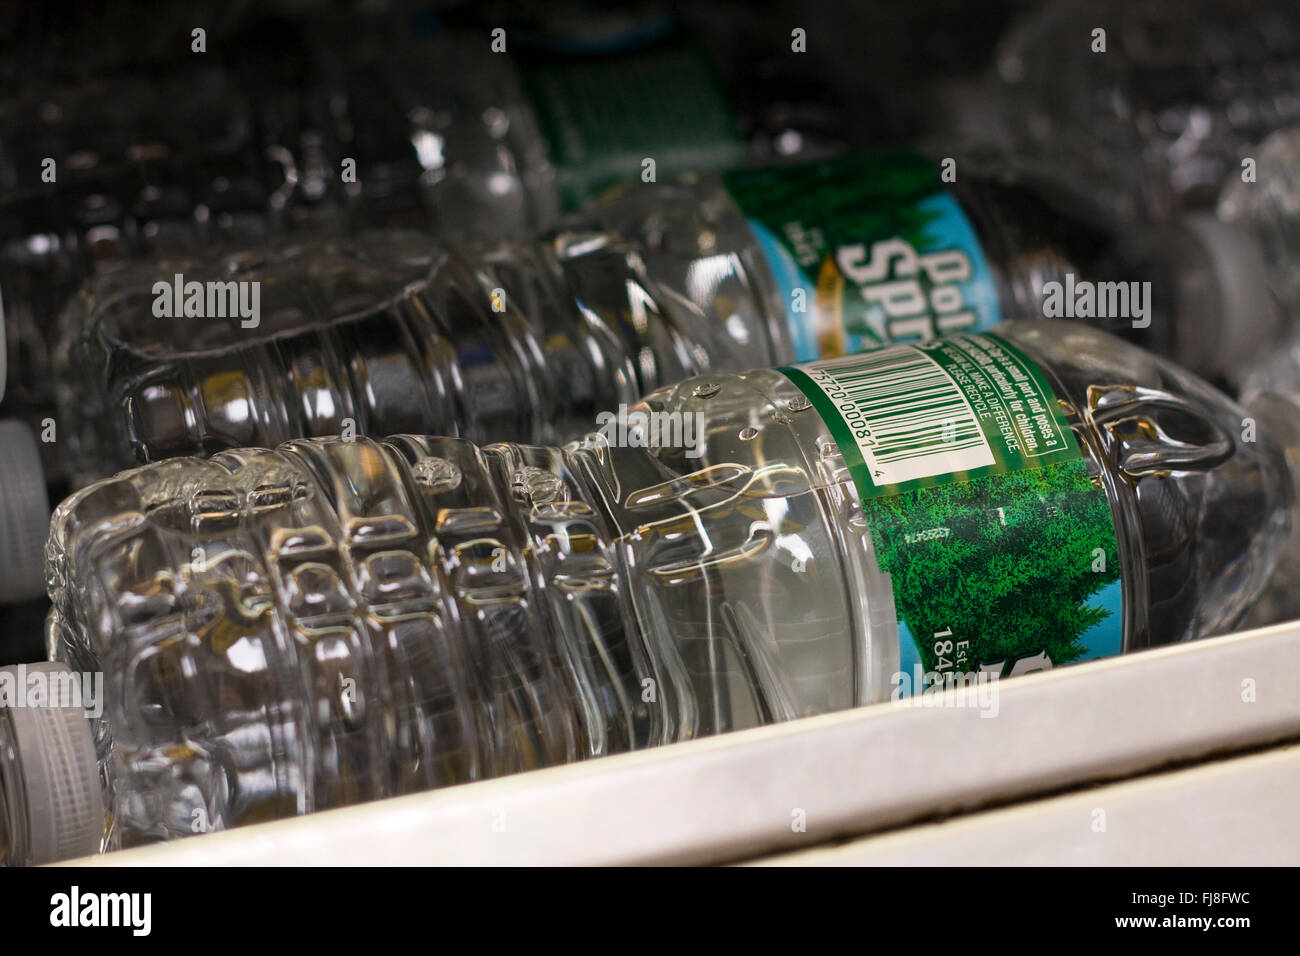 Plastic Water Bottles with UPC symbol stacked in a refrigerated shelf in a retail store Stock Photo